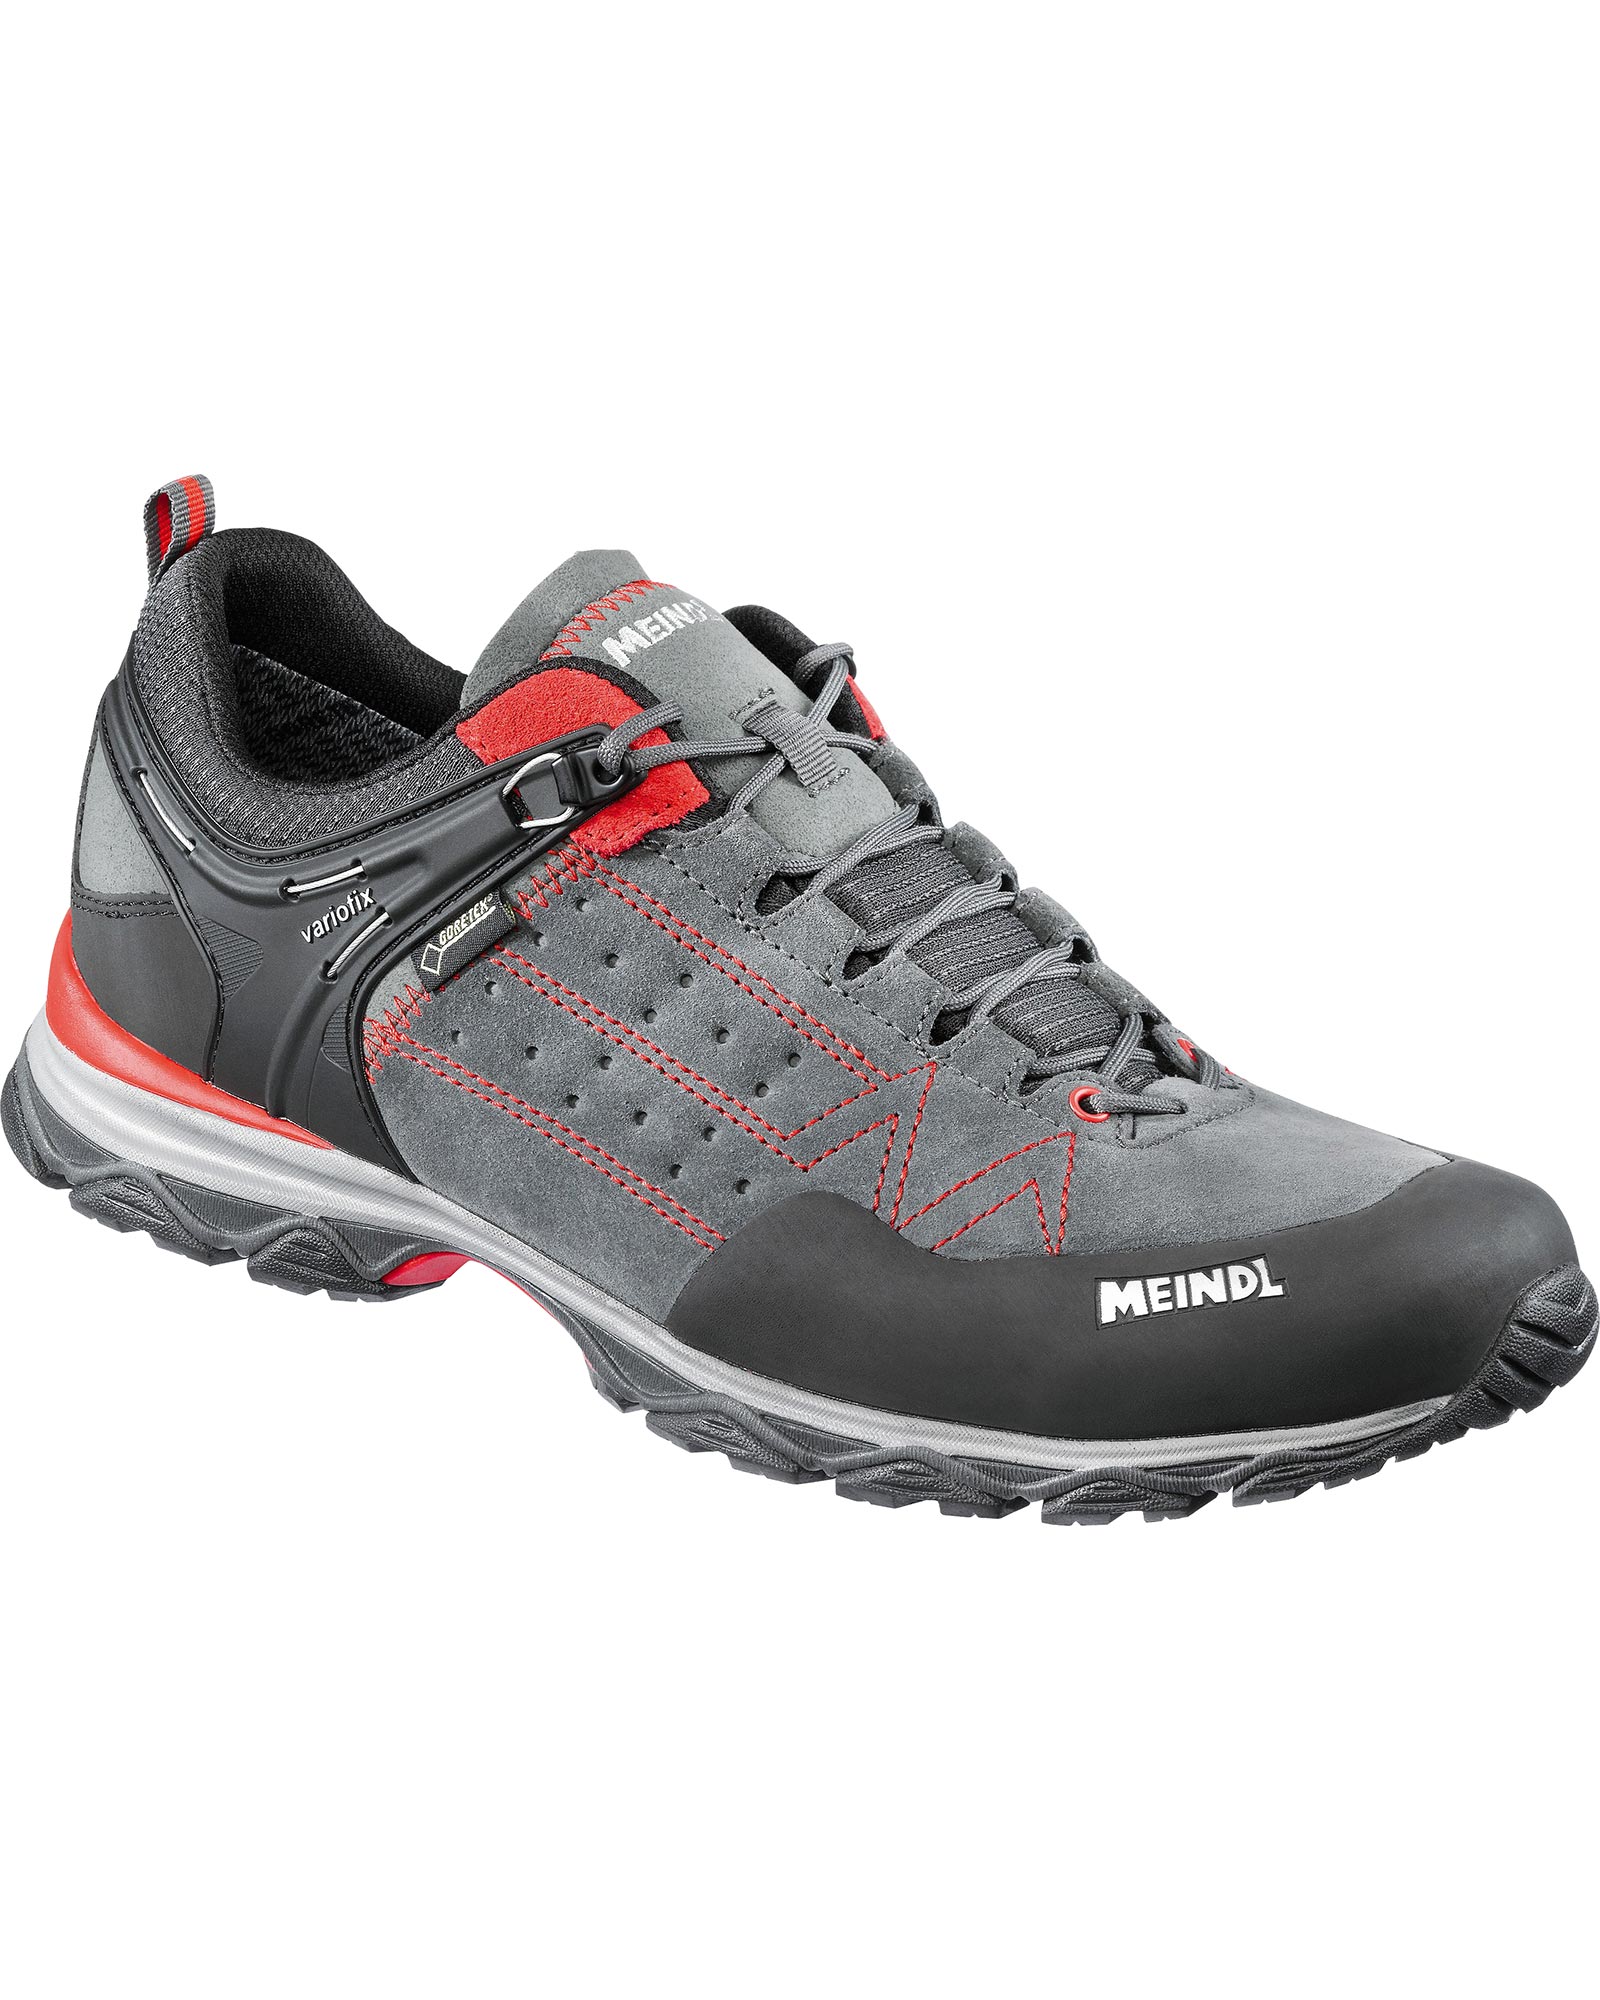 Meindl Ontario GORE TEX Men’s Shoes - Red/Anthracite UK 10